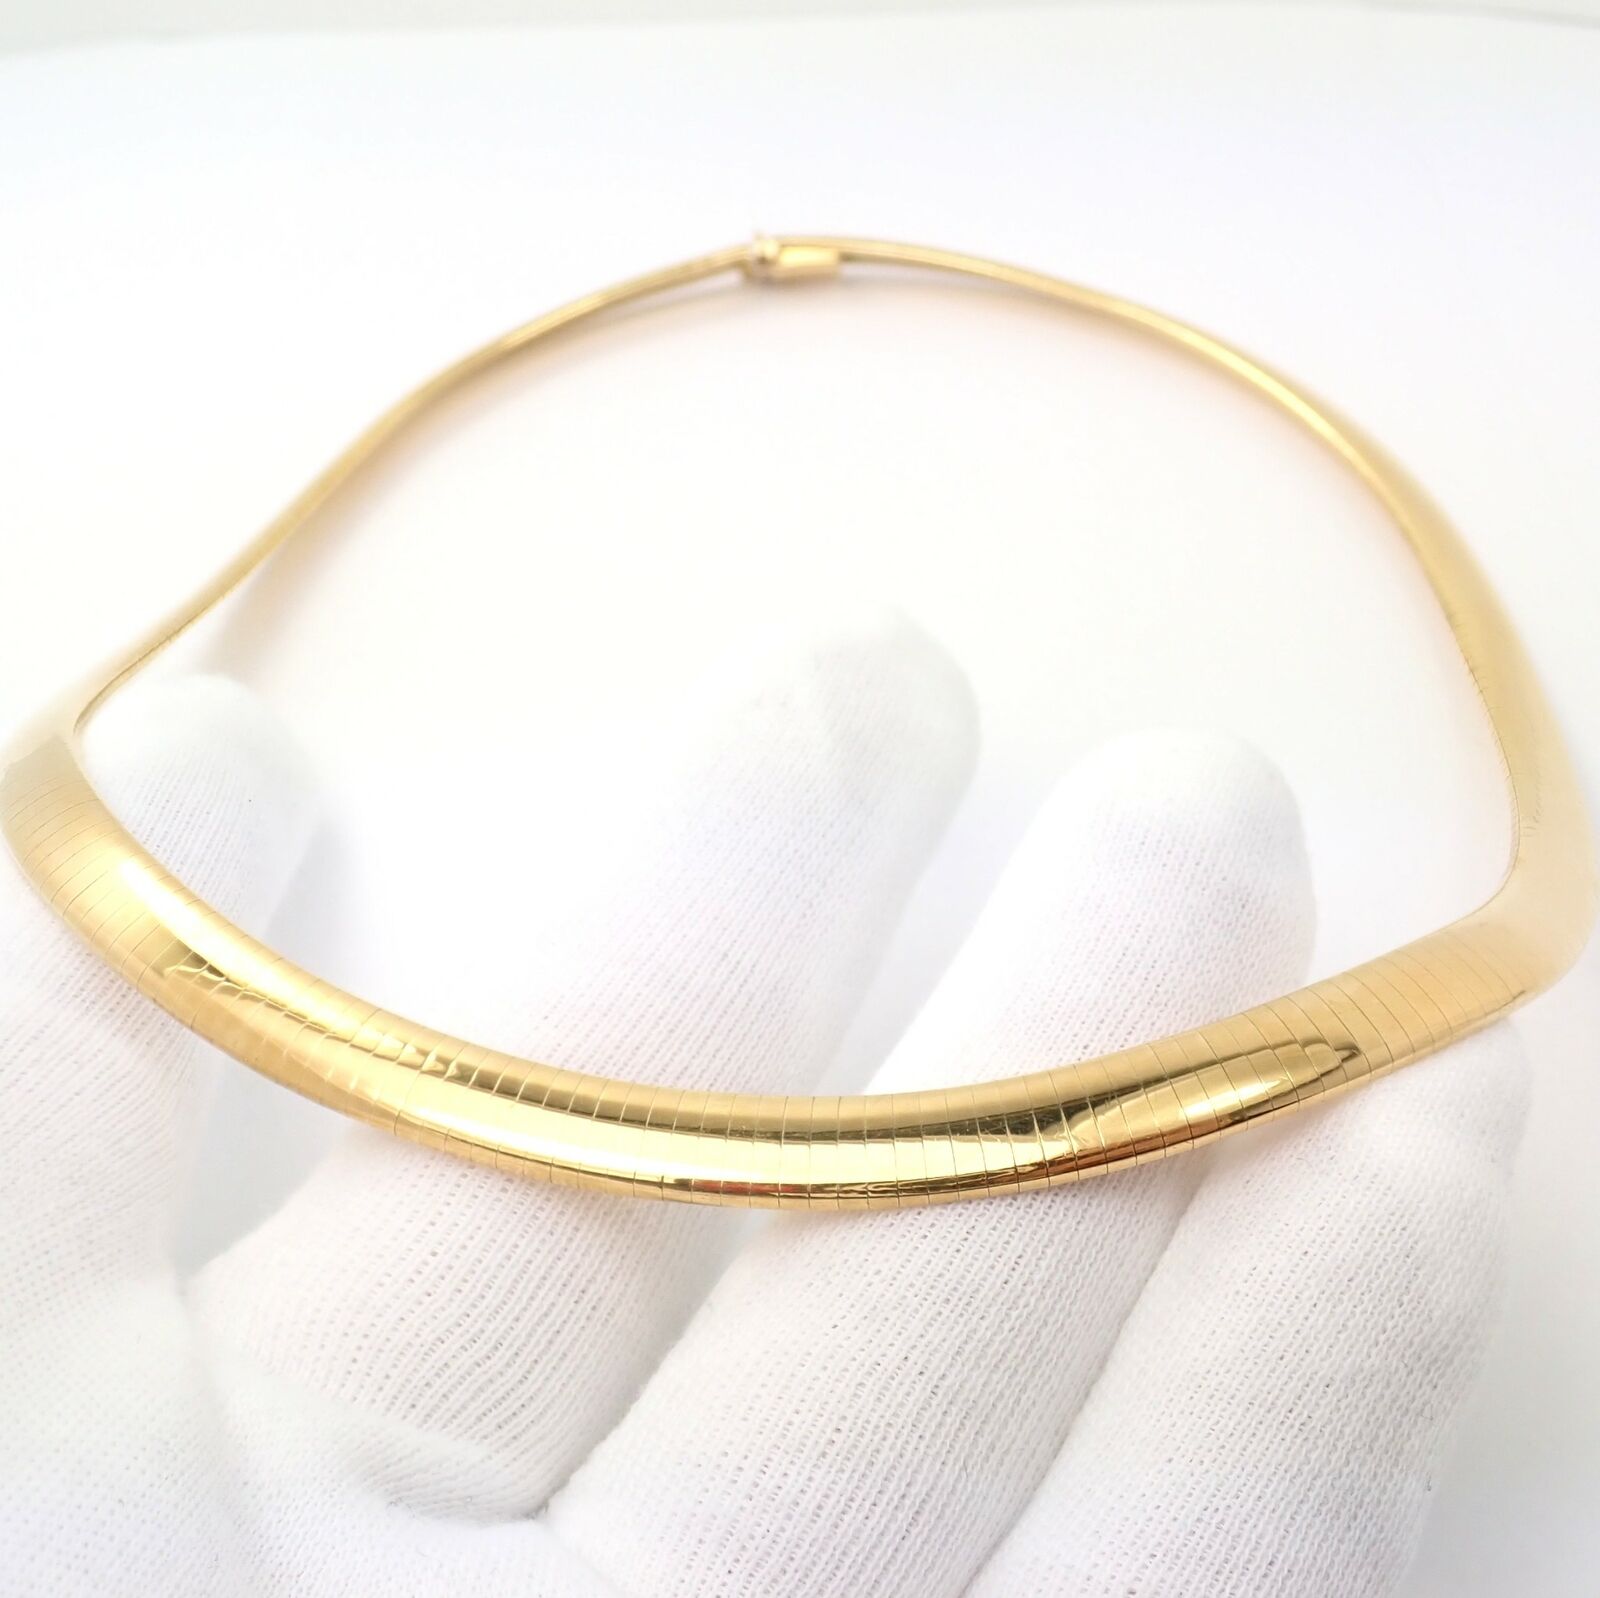 Van Cleef & Arpels Jewelry & Watches:Fine Jewelry:Necklaces & Pendants Rare! Authentic Van Cleef & Arpels 18k Yellow Gold Snake Collar Chain Necklace